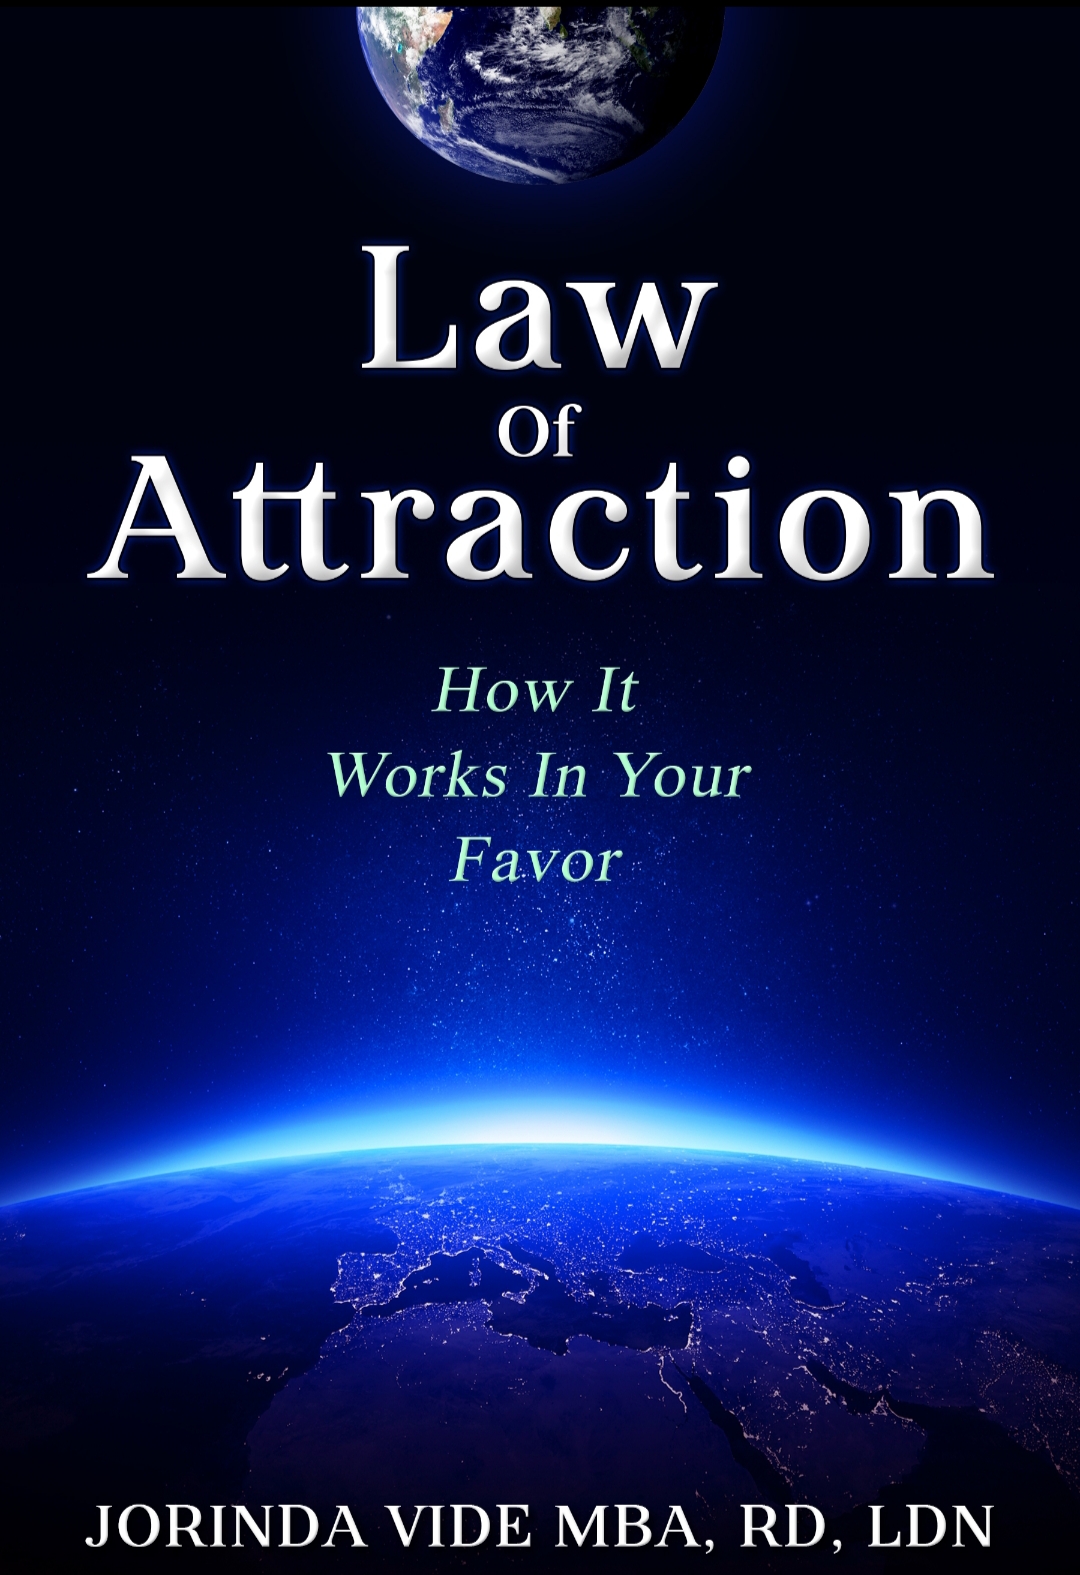 FREE: Law of Attraction: How it Works in Your Favor by Jorinda Vide